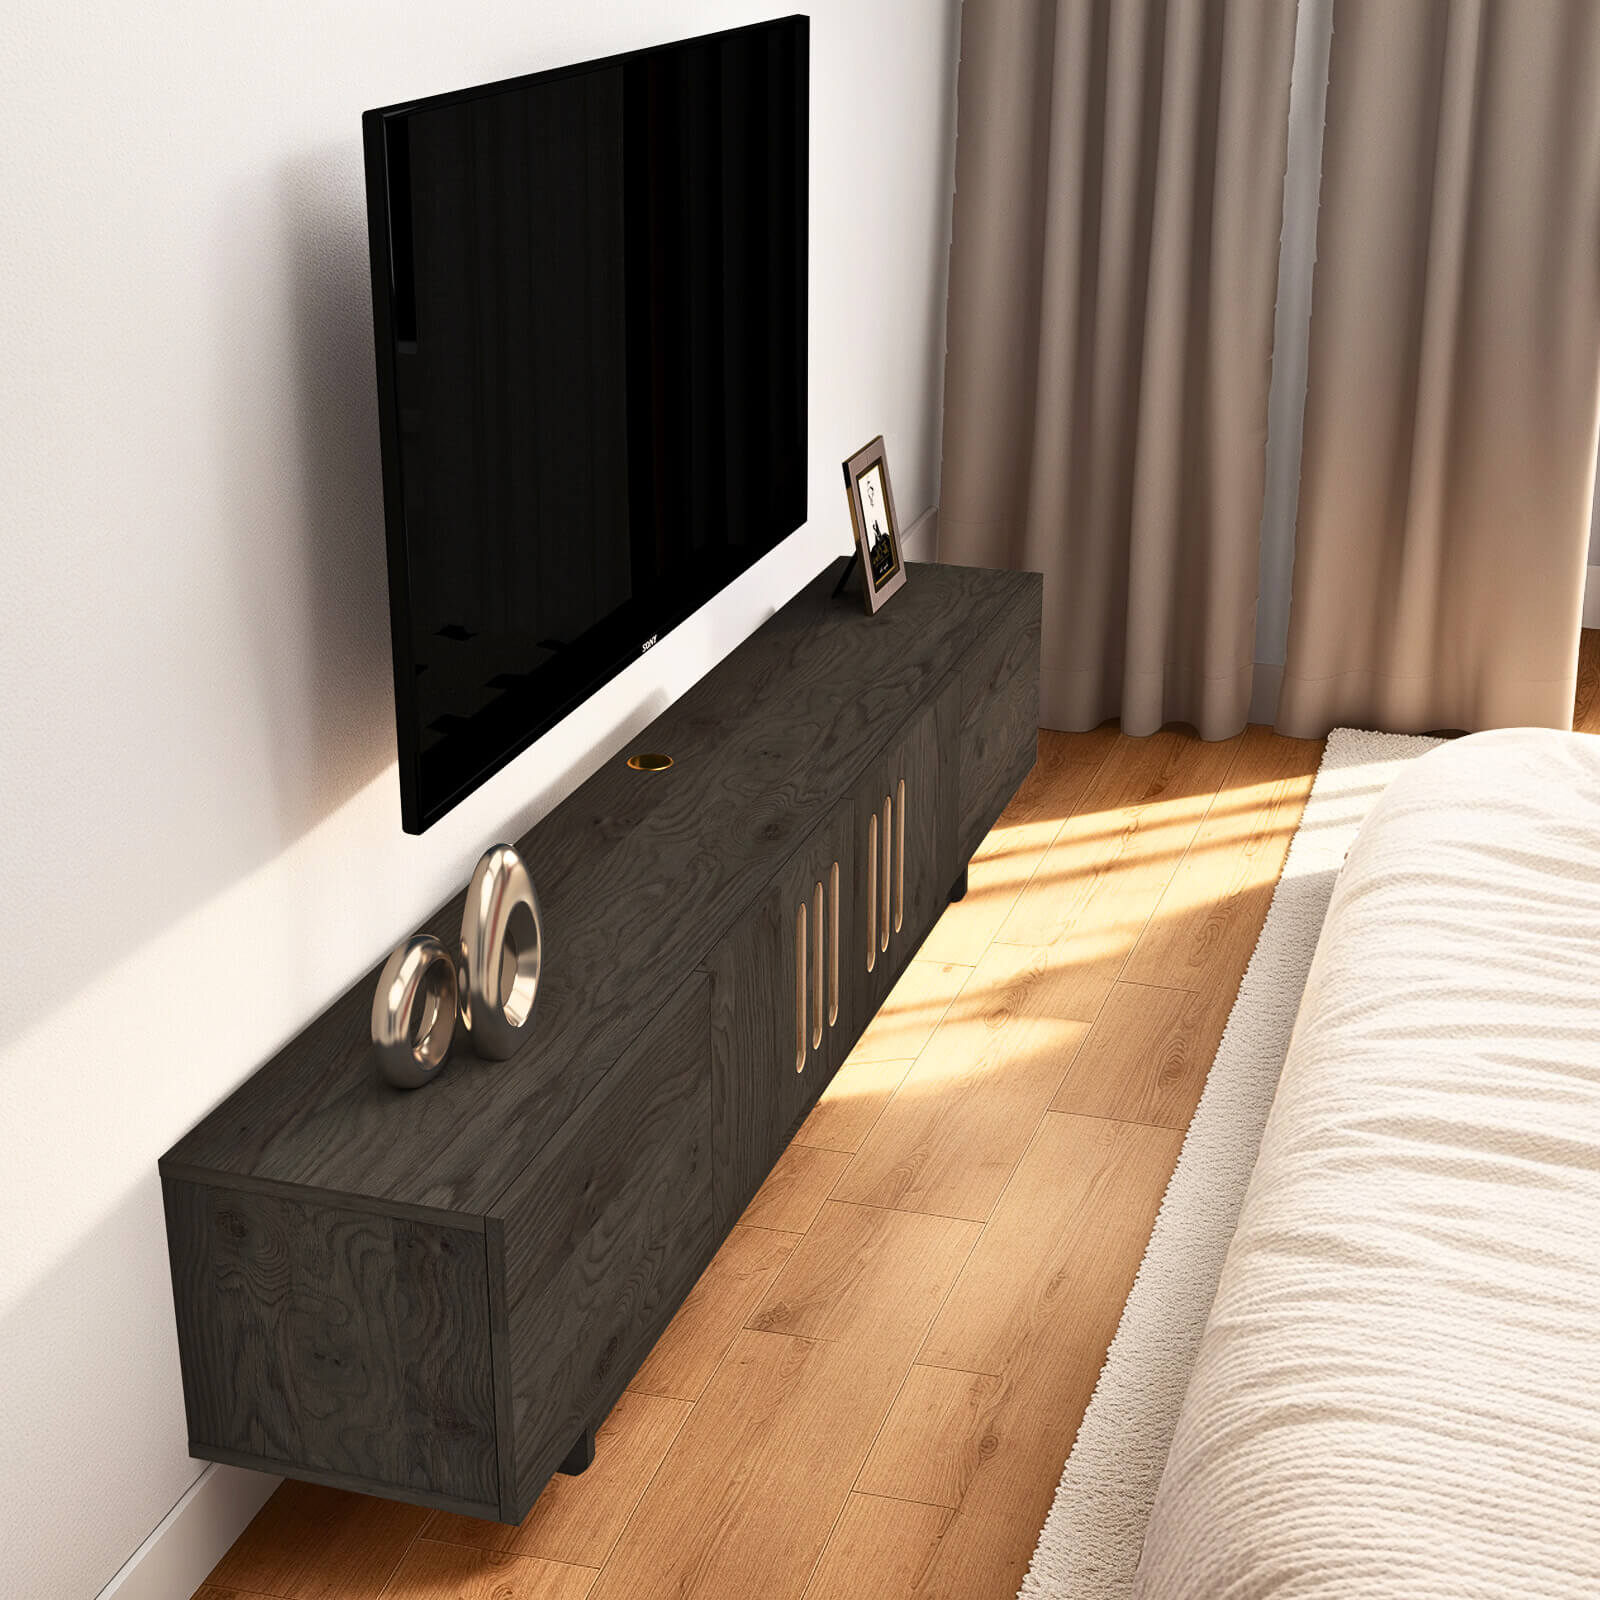 75.85" Dark Grey Modern Minimalist Wood Floating TV Stand with Above Shelf and Slatted Door